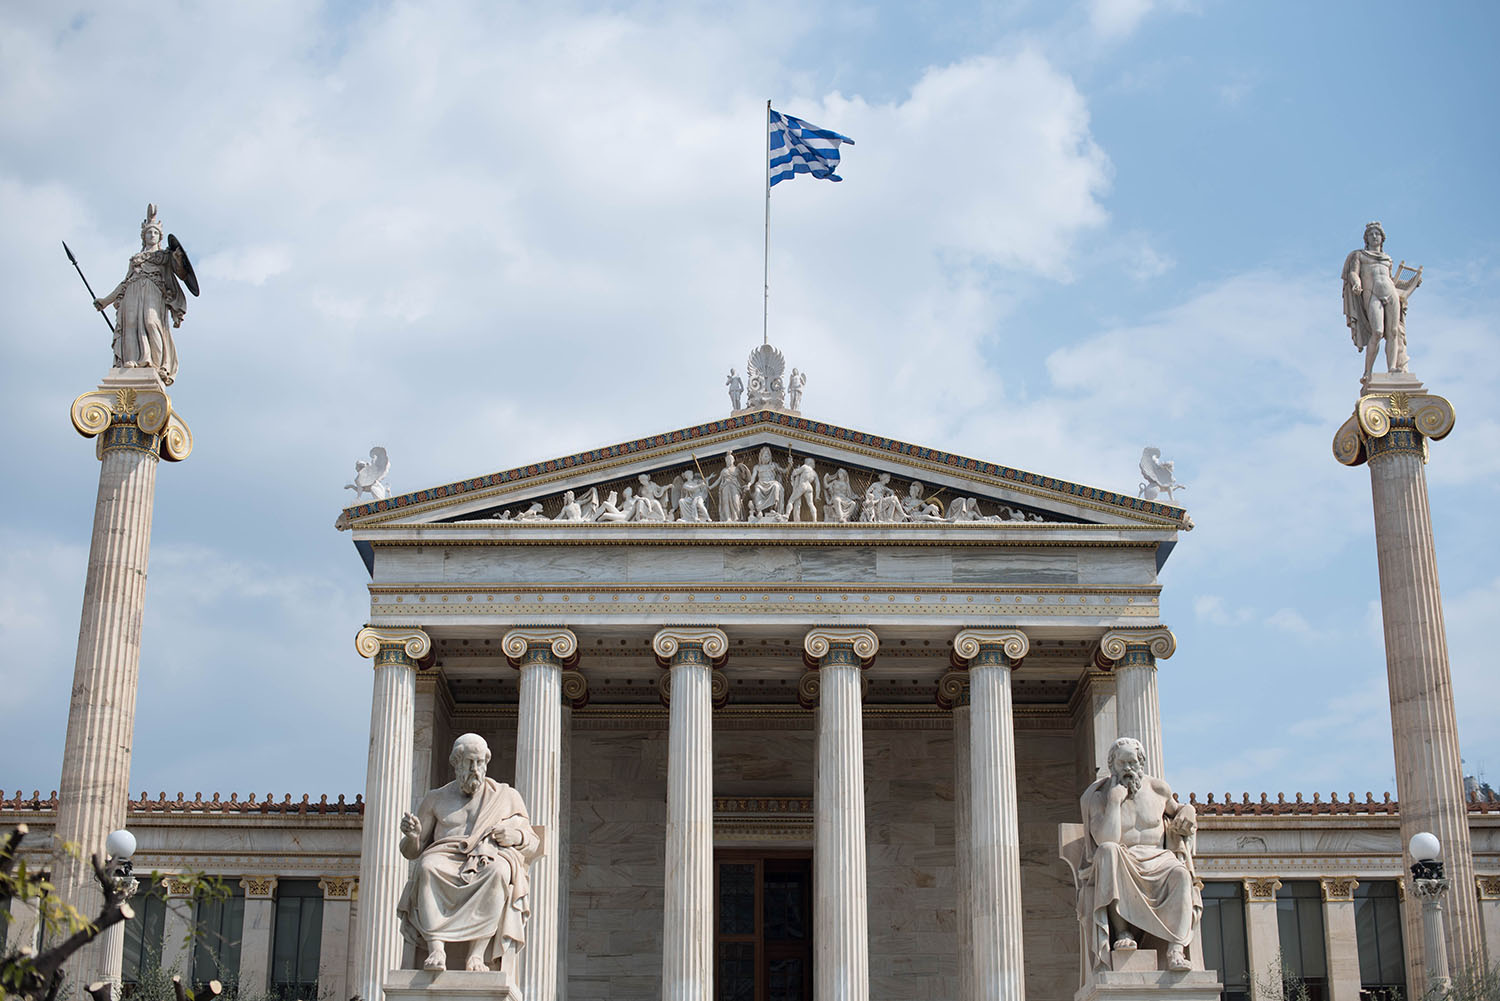 The Academy of Athens on Panepistimiou in the Greek capital, as captured by travel blogger Cee Fardoe of Coco & Vera